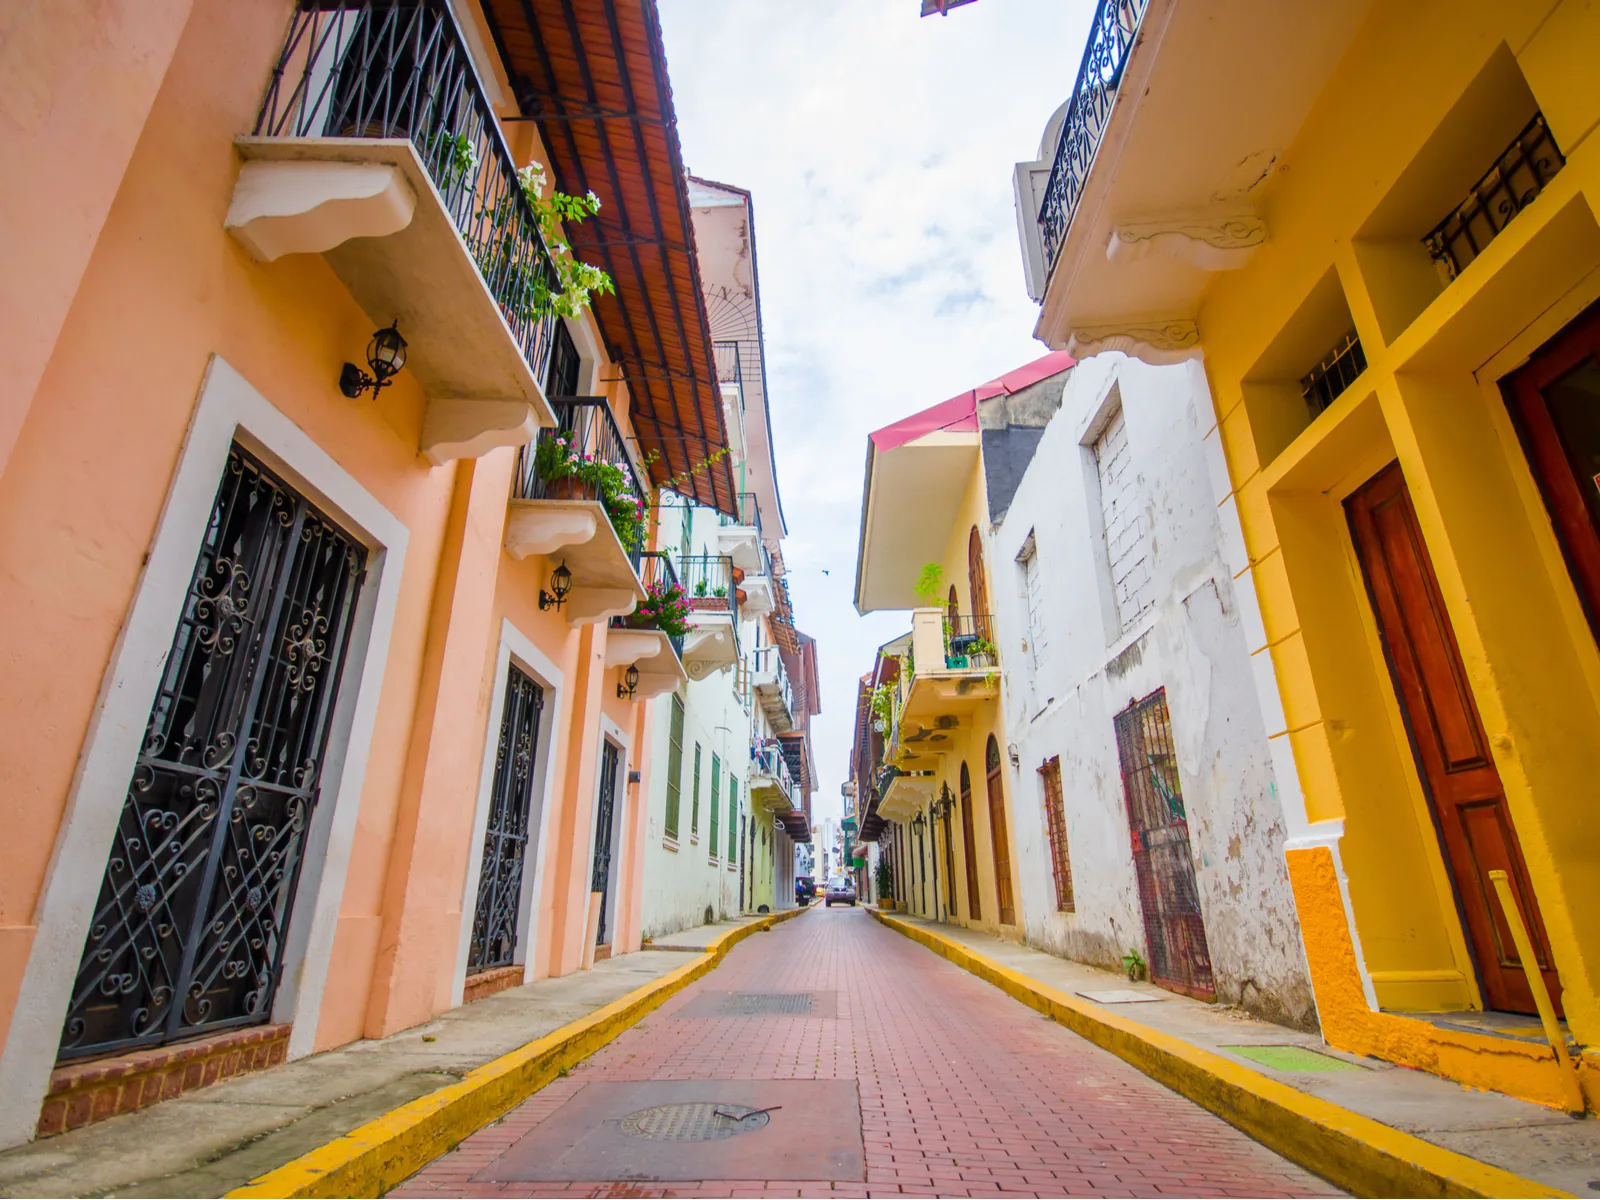 Historic old town Panama City with empty streets that'd make someone wonder, "Is Panama Safe?"